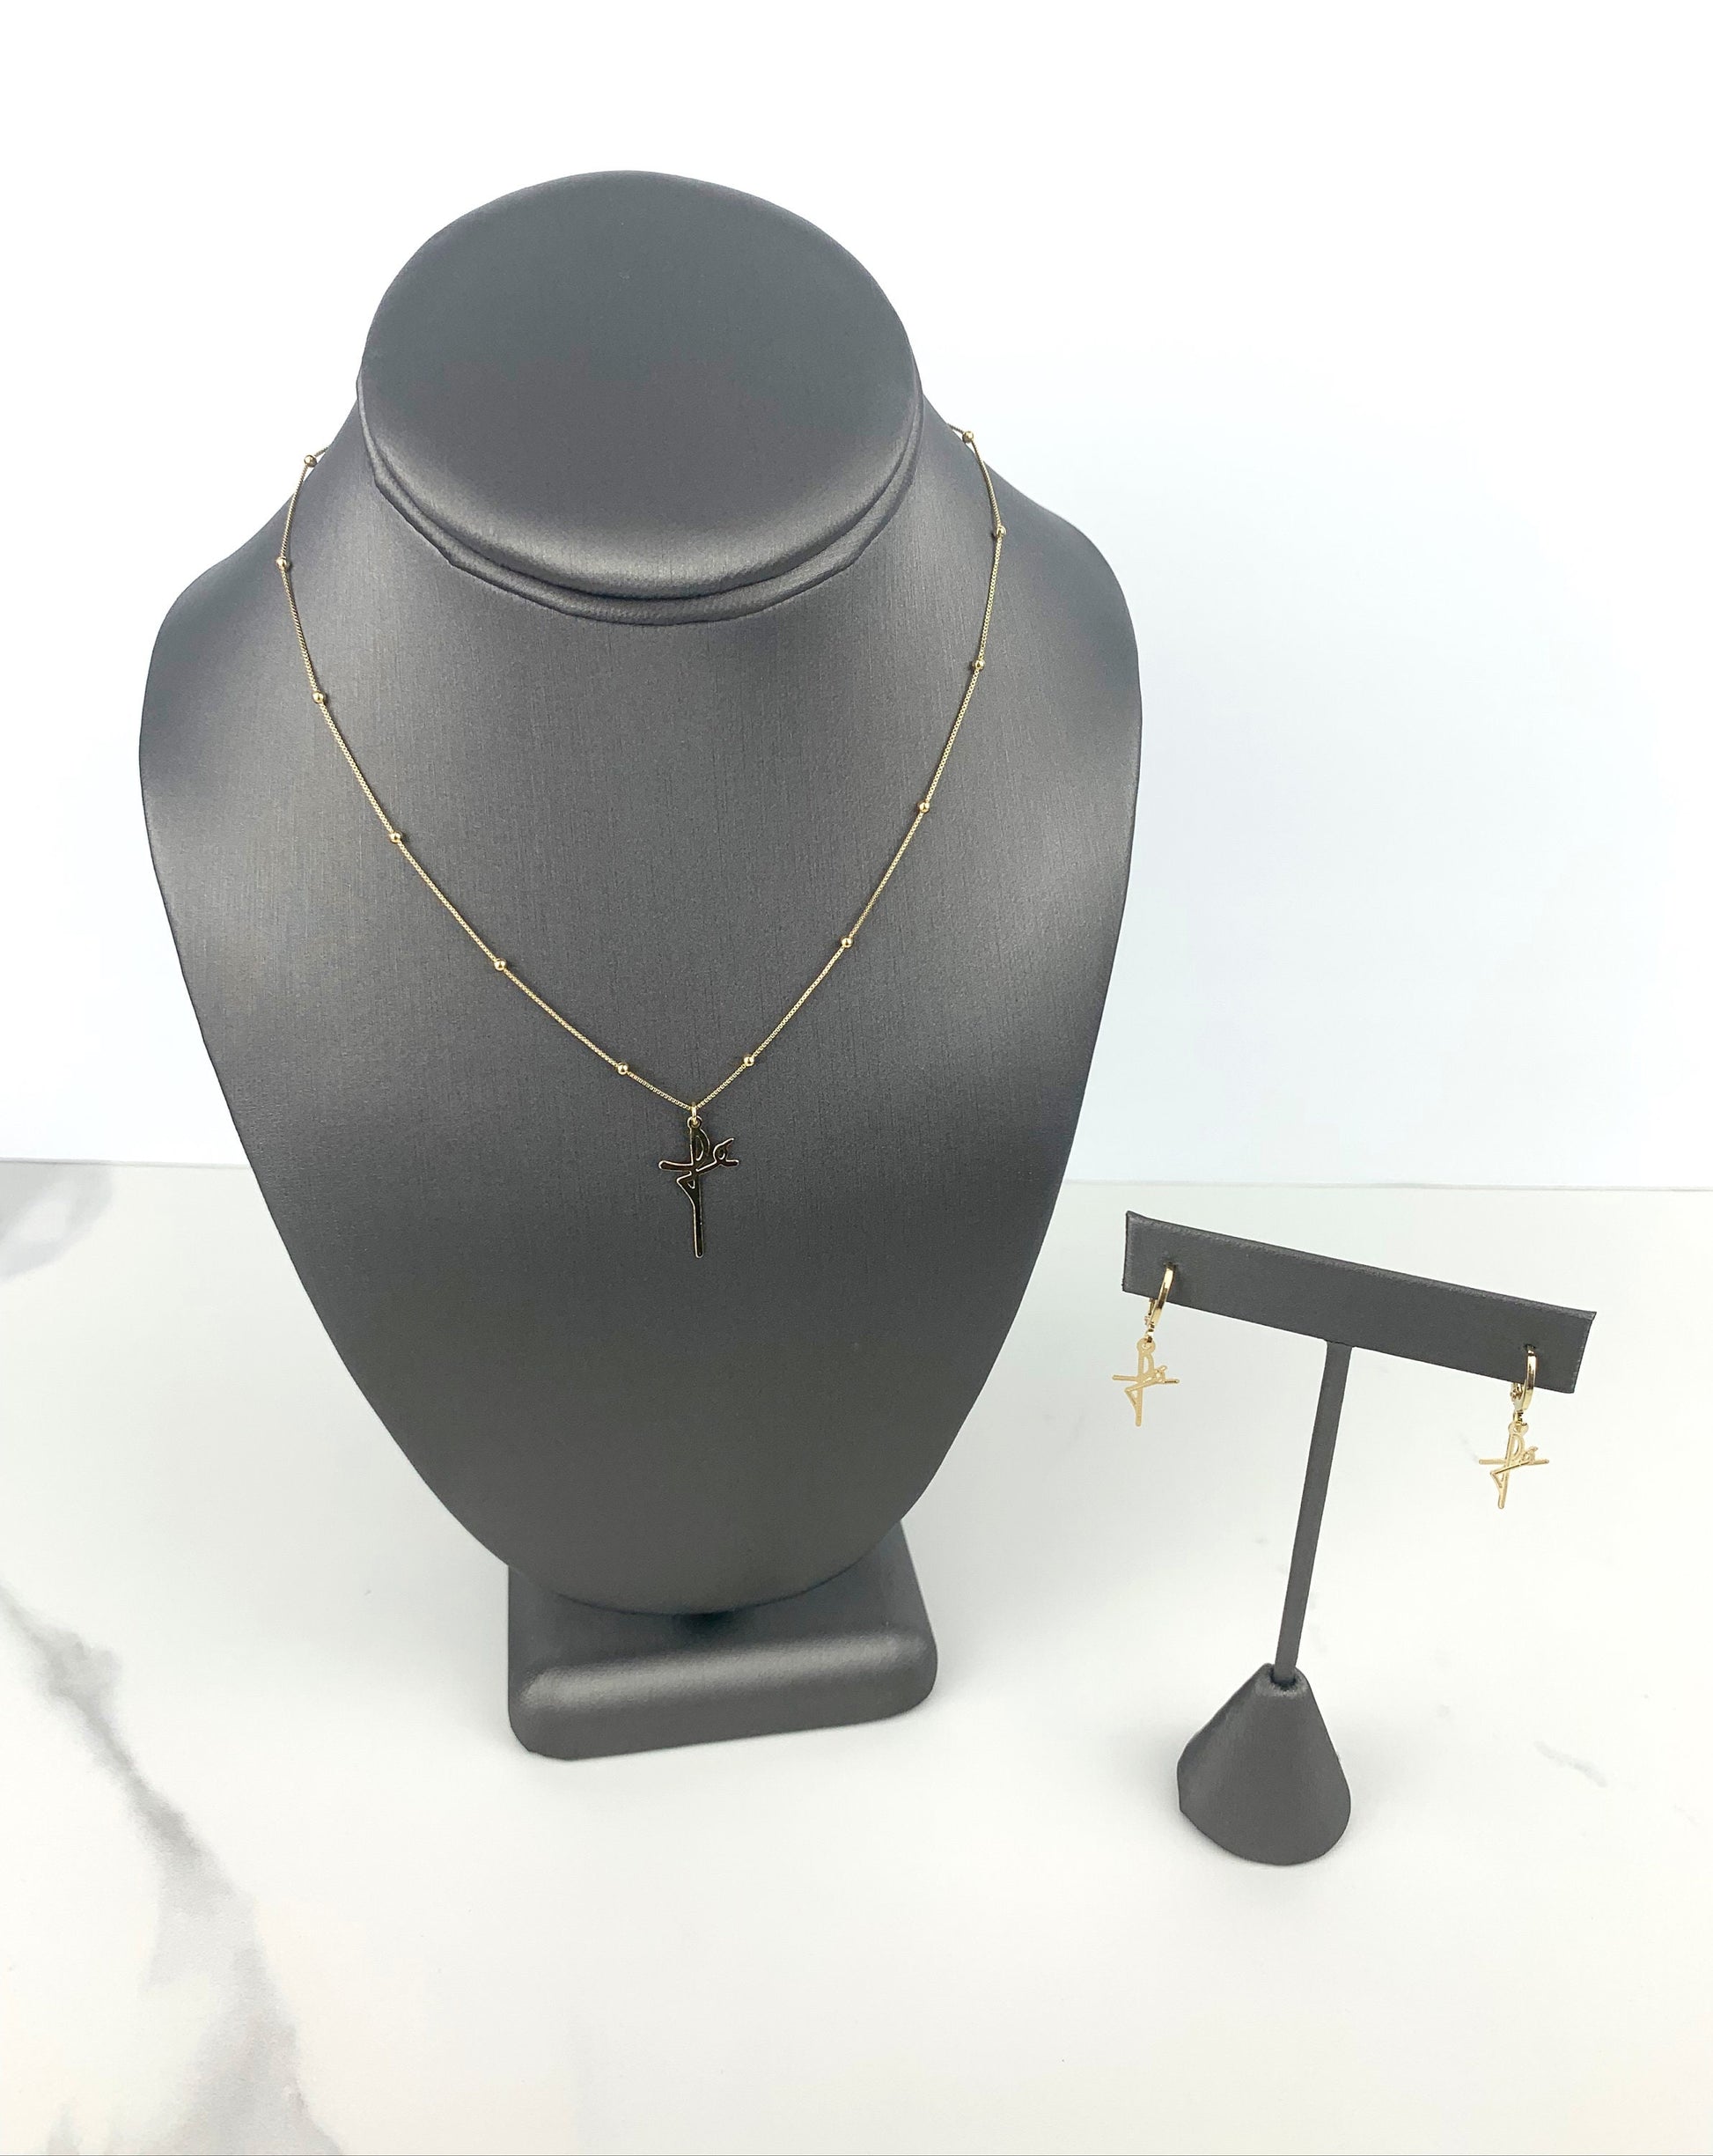 18k Gold Filled, Description Fe, Feith Necklace or/and Earrings Set Wholesale Jewelry Supplies